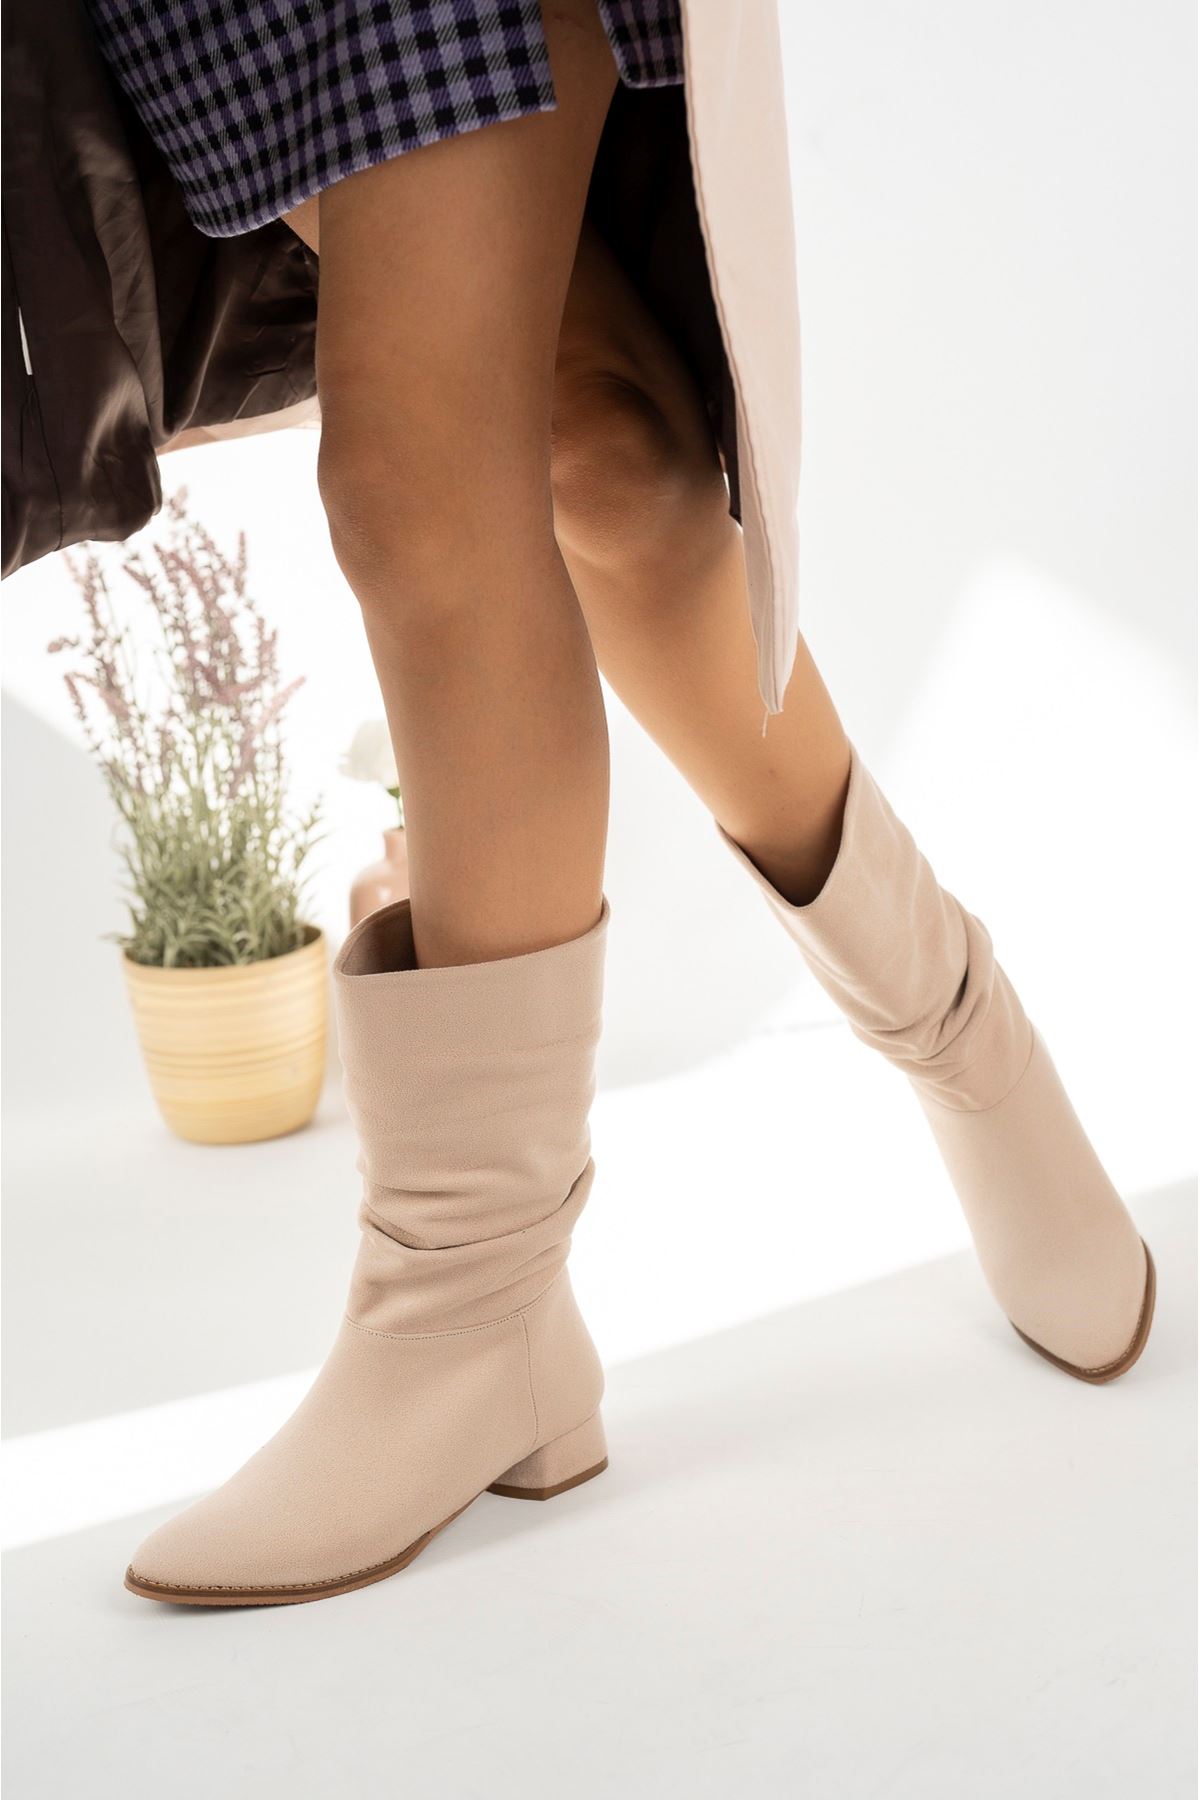 Gusseted Beige Suede Women's Boots